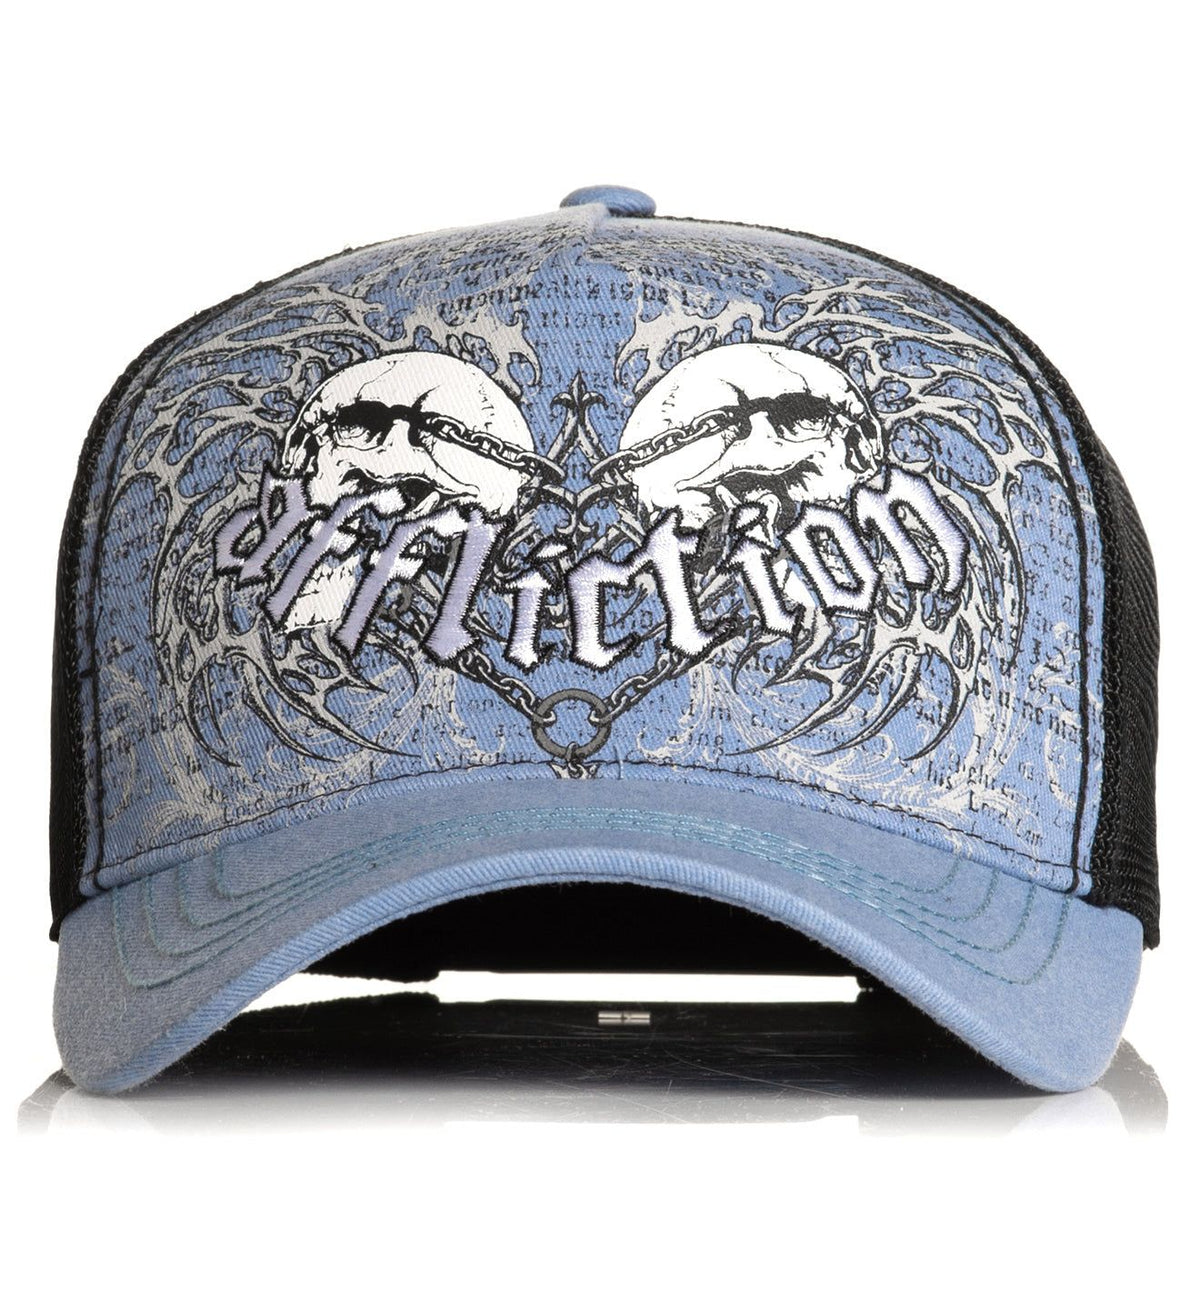 Collapse Hat - Affliction Clothing